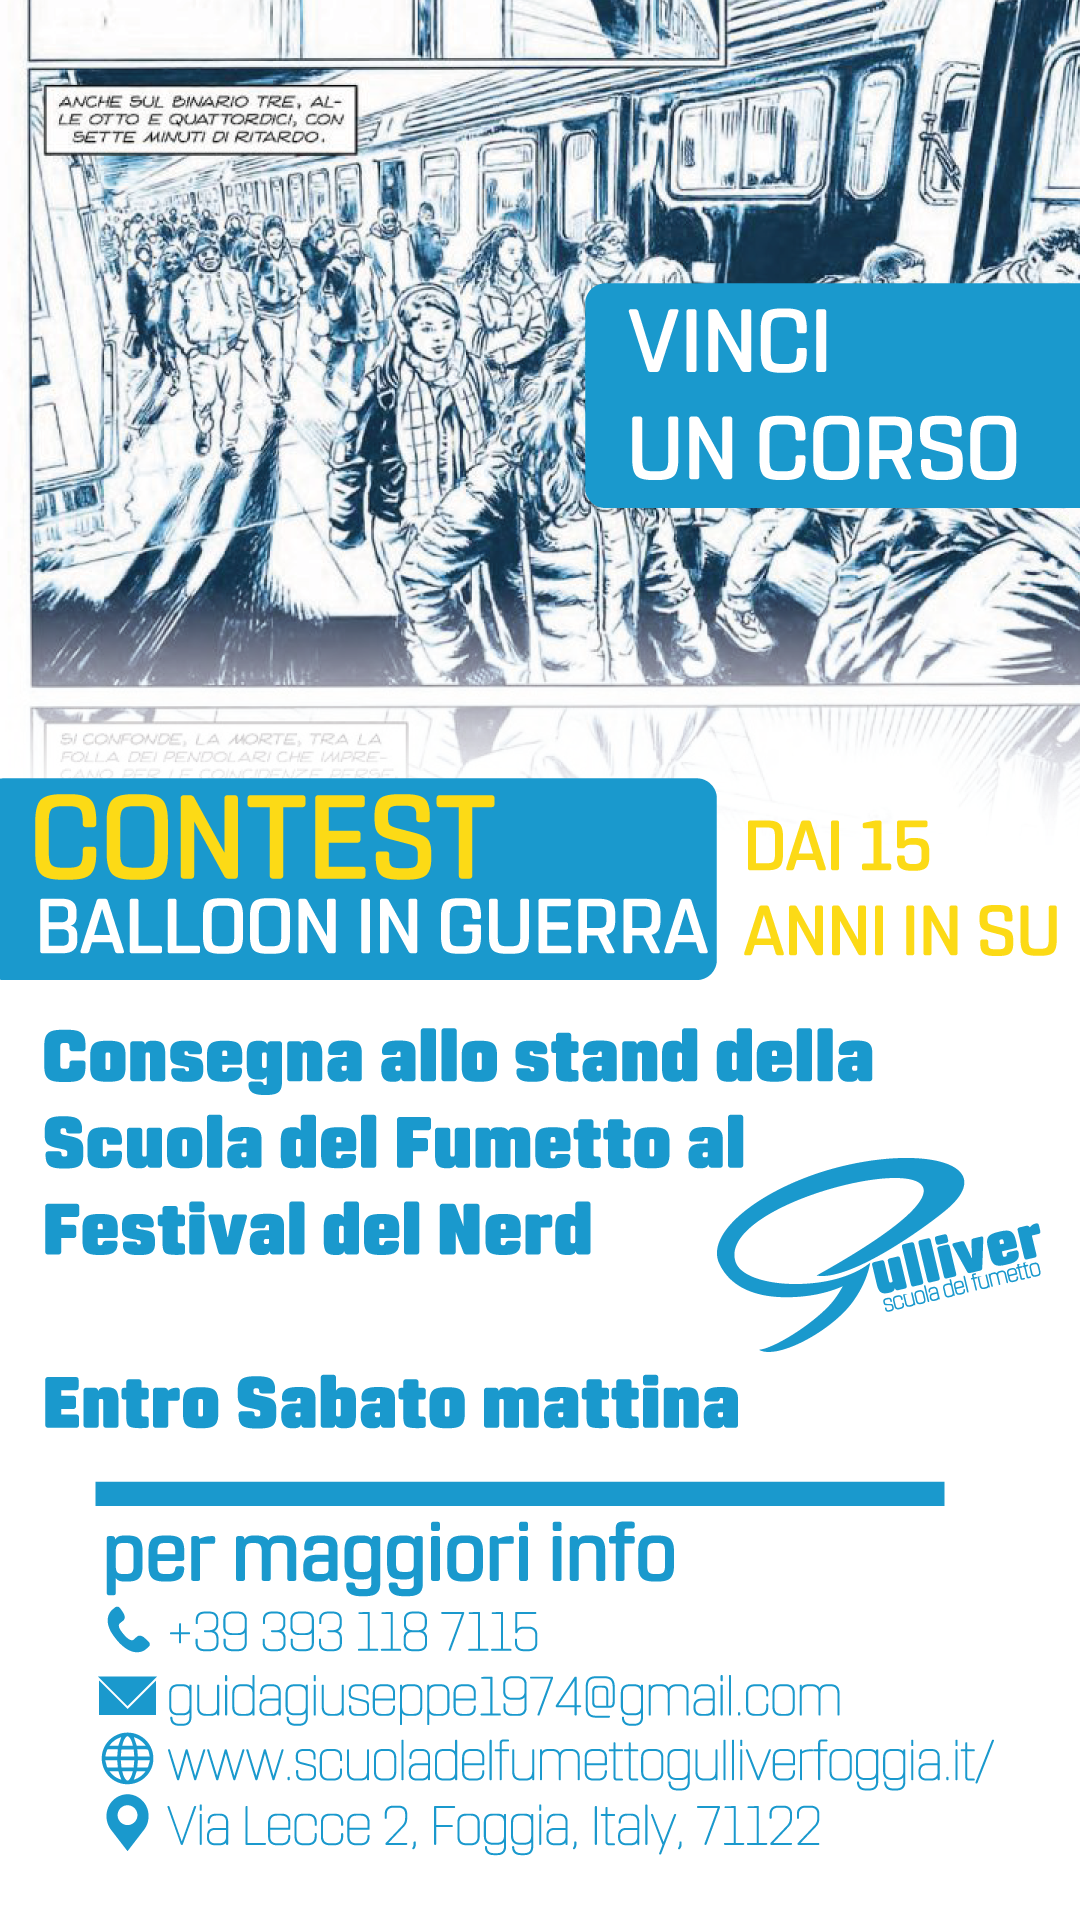 Contest Baloon in Guerra